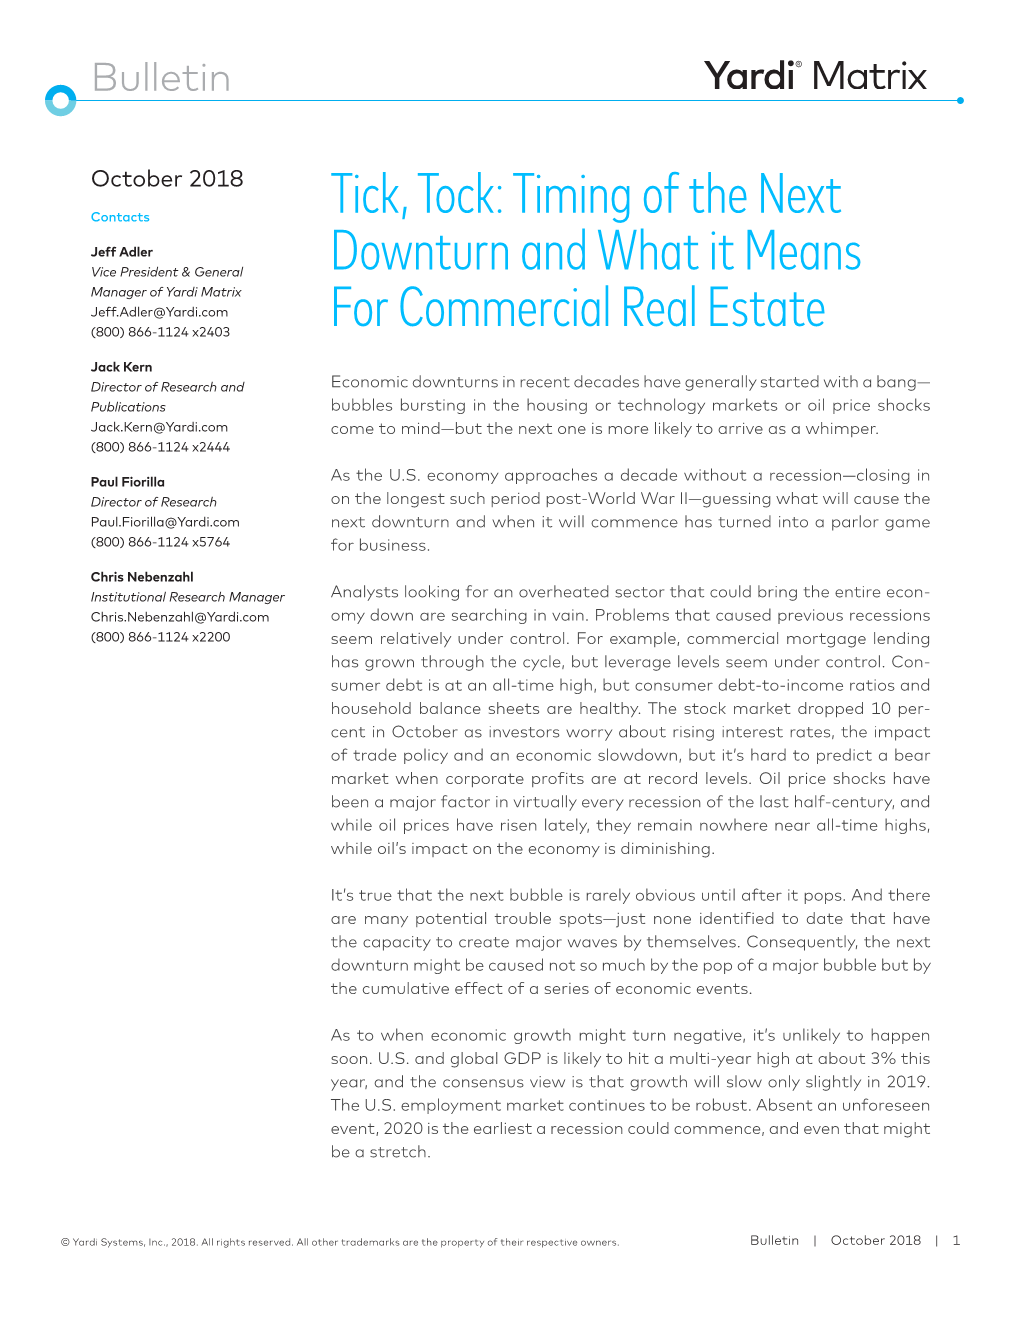 Tick, Tock: Timing of the Next Downturn and What It Means for Commercial Real Estate